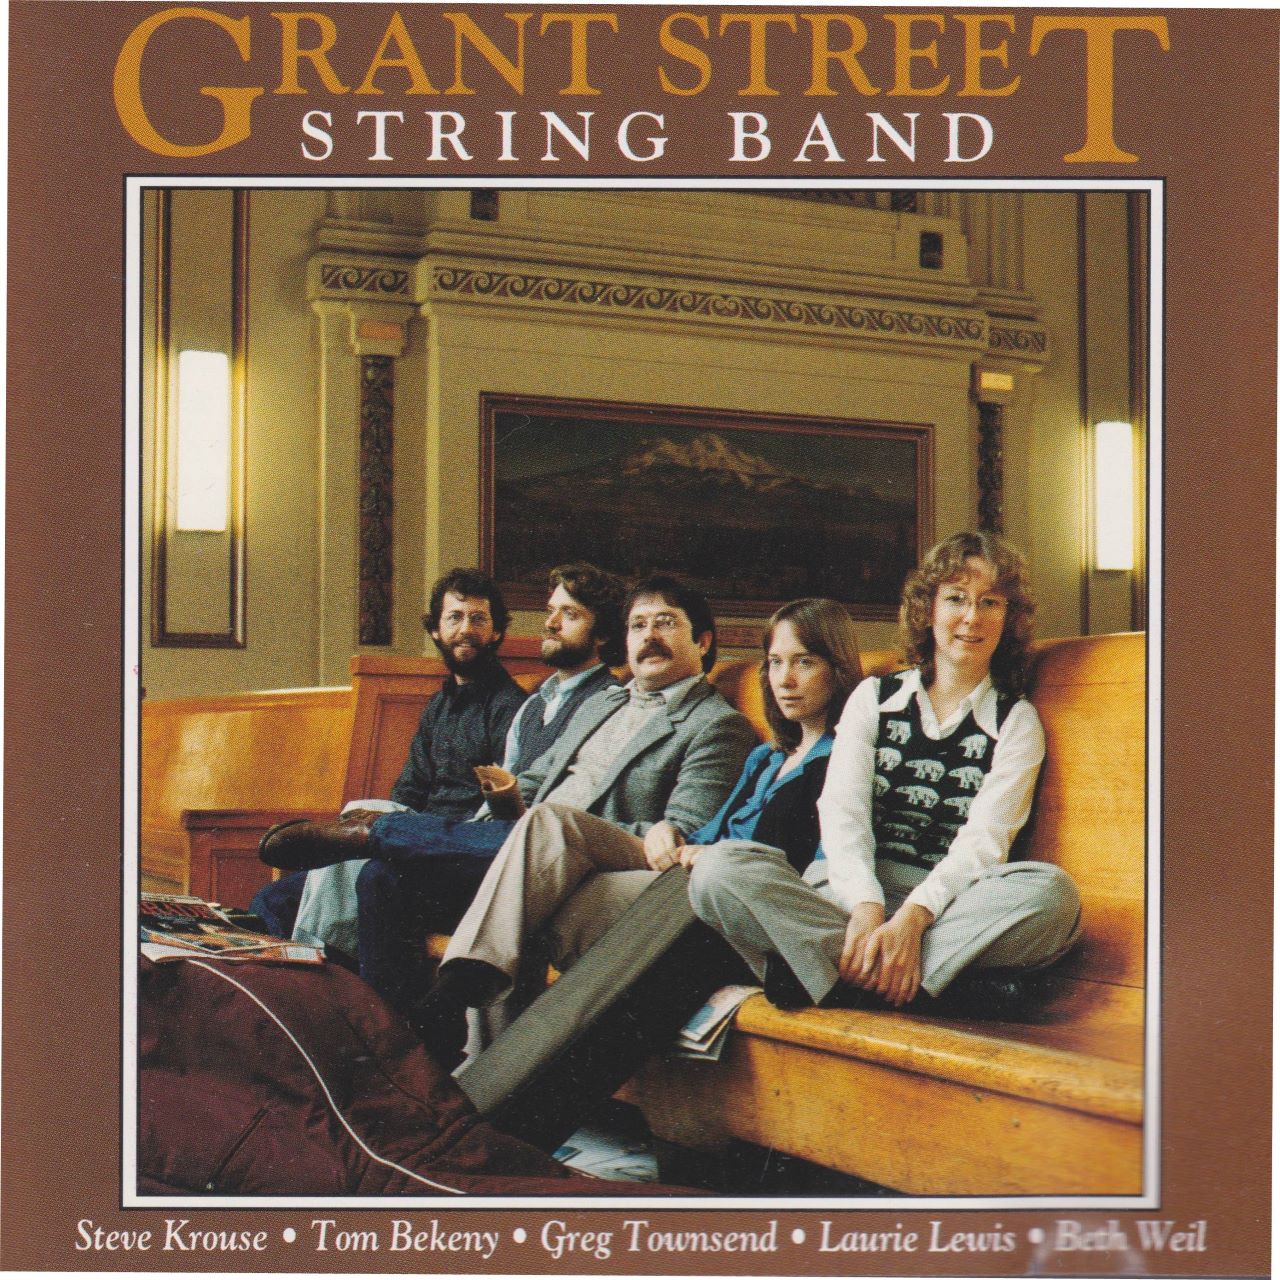 Grant Street String Band - The Grant Street String Band cover album